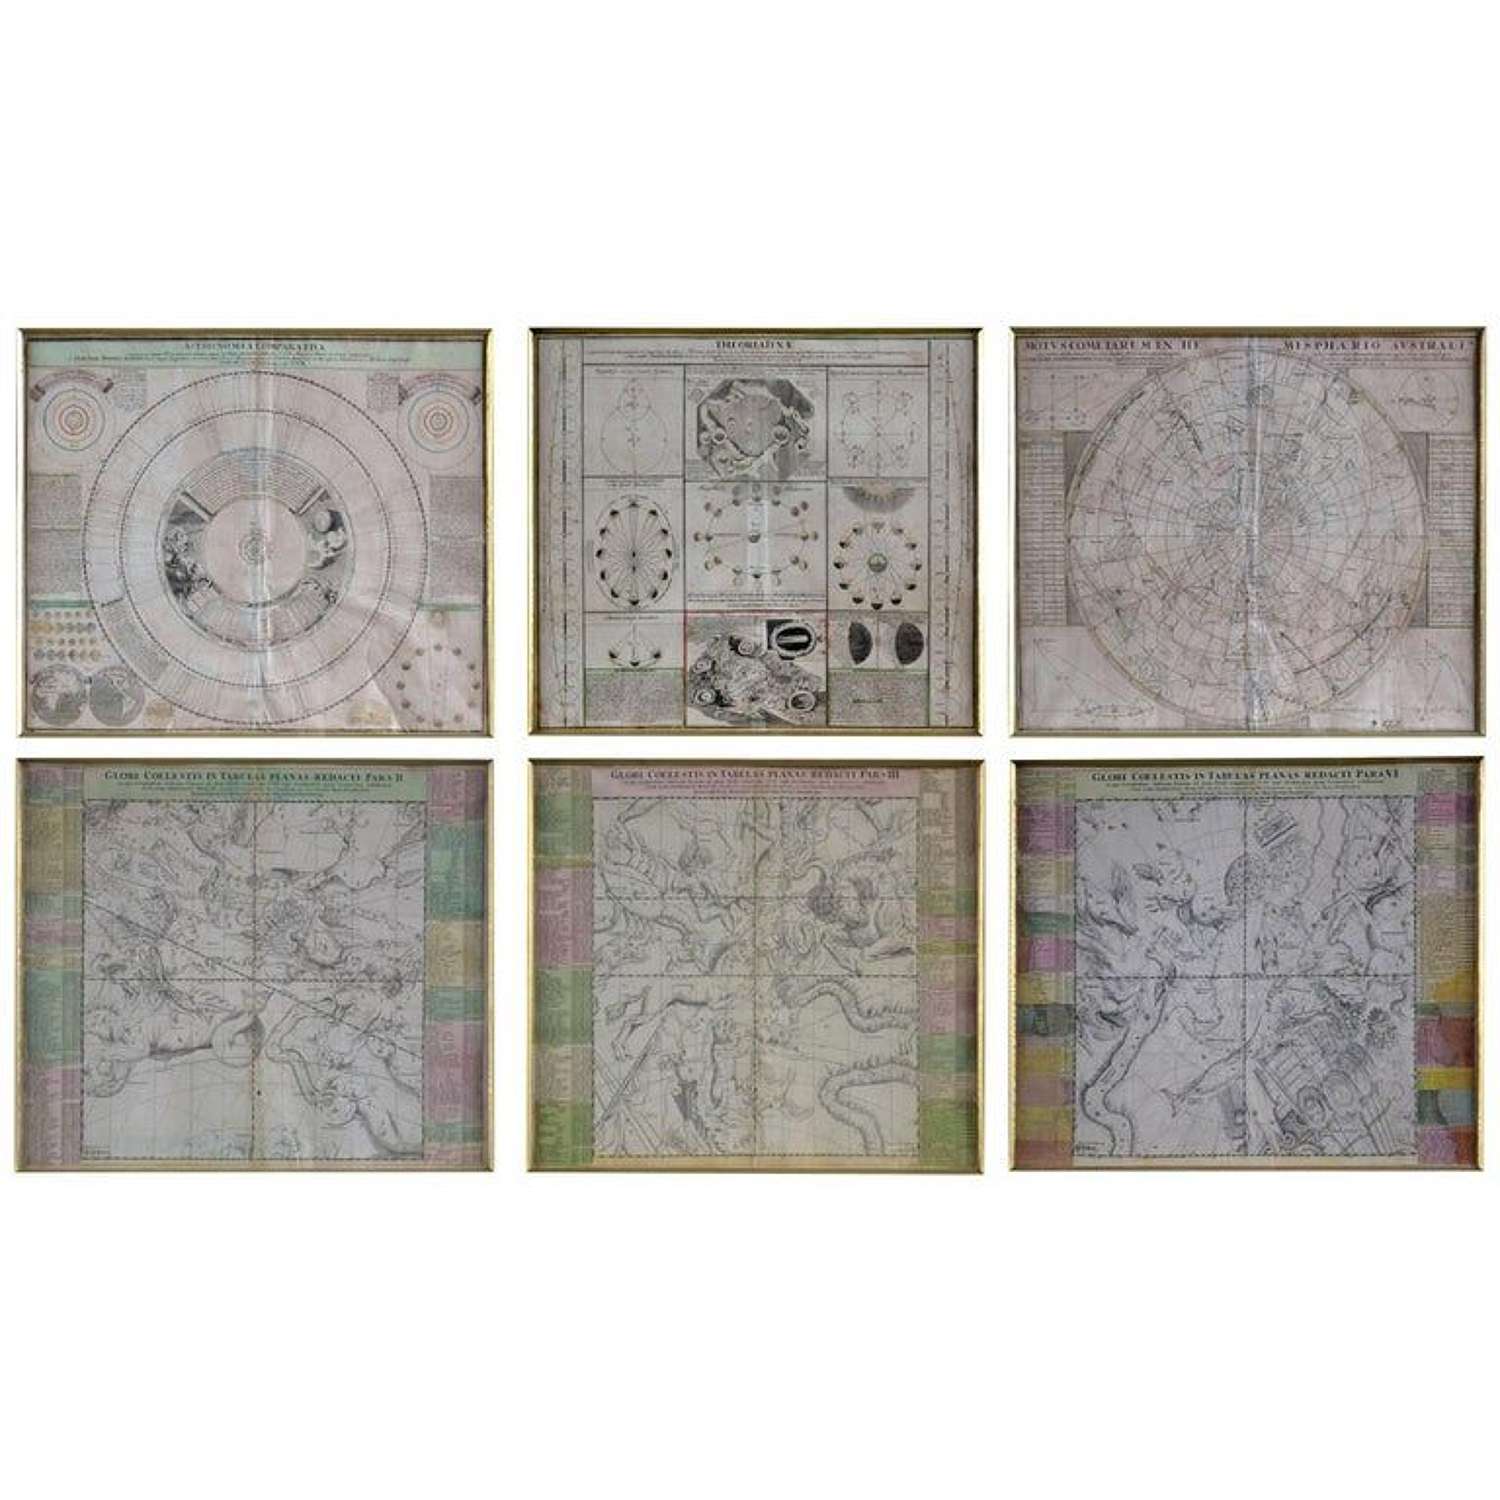 Celestial Engravings Charts by Astronomer Doppelmayr